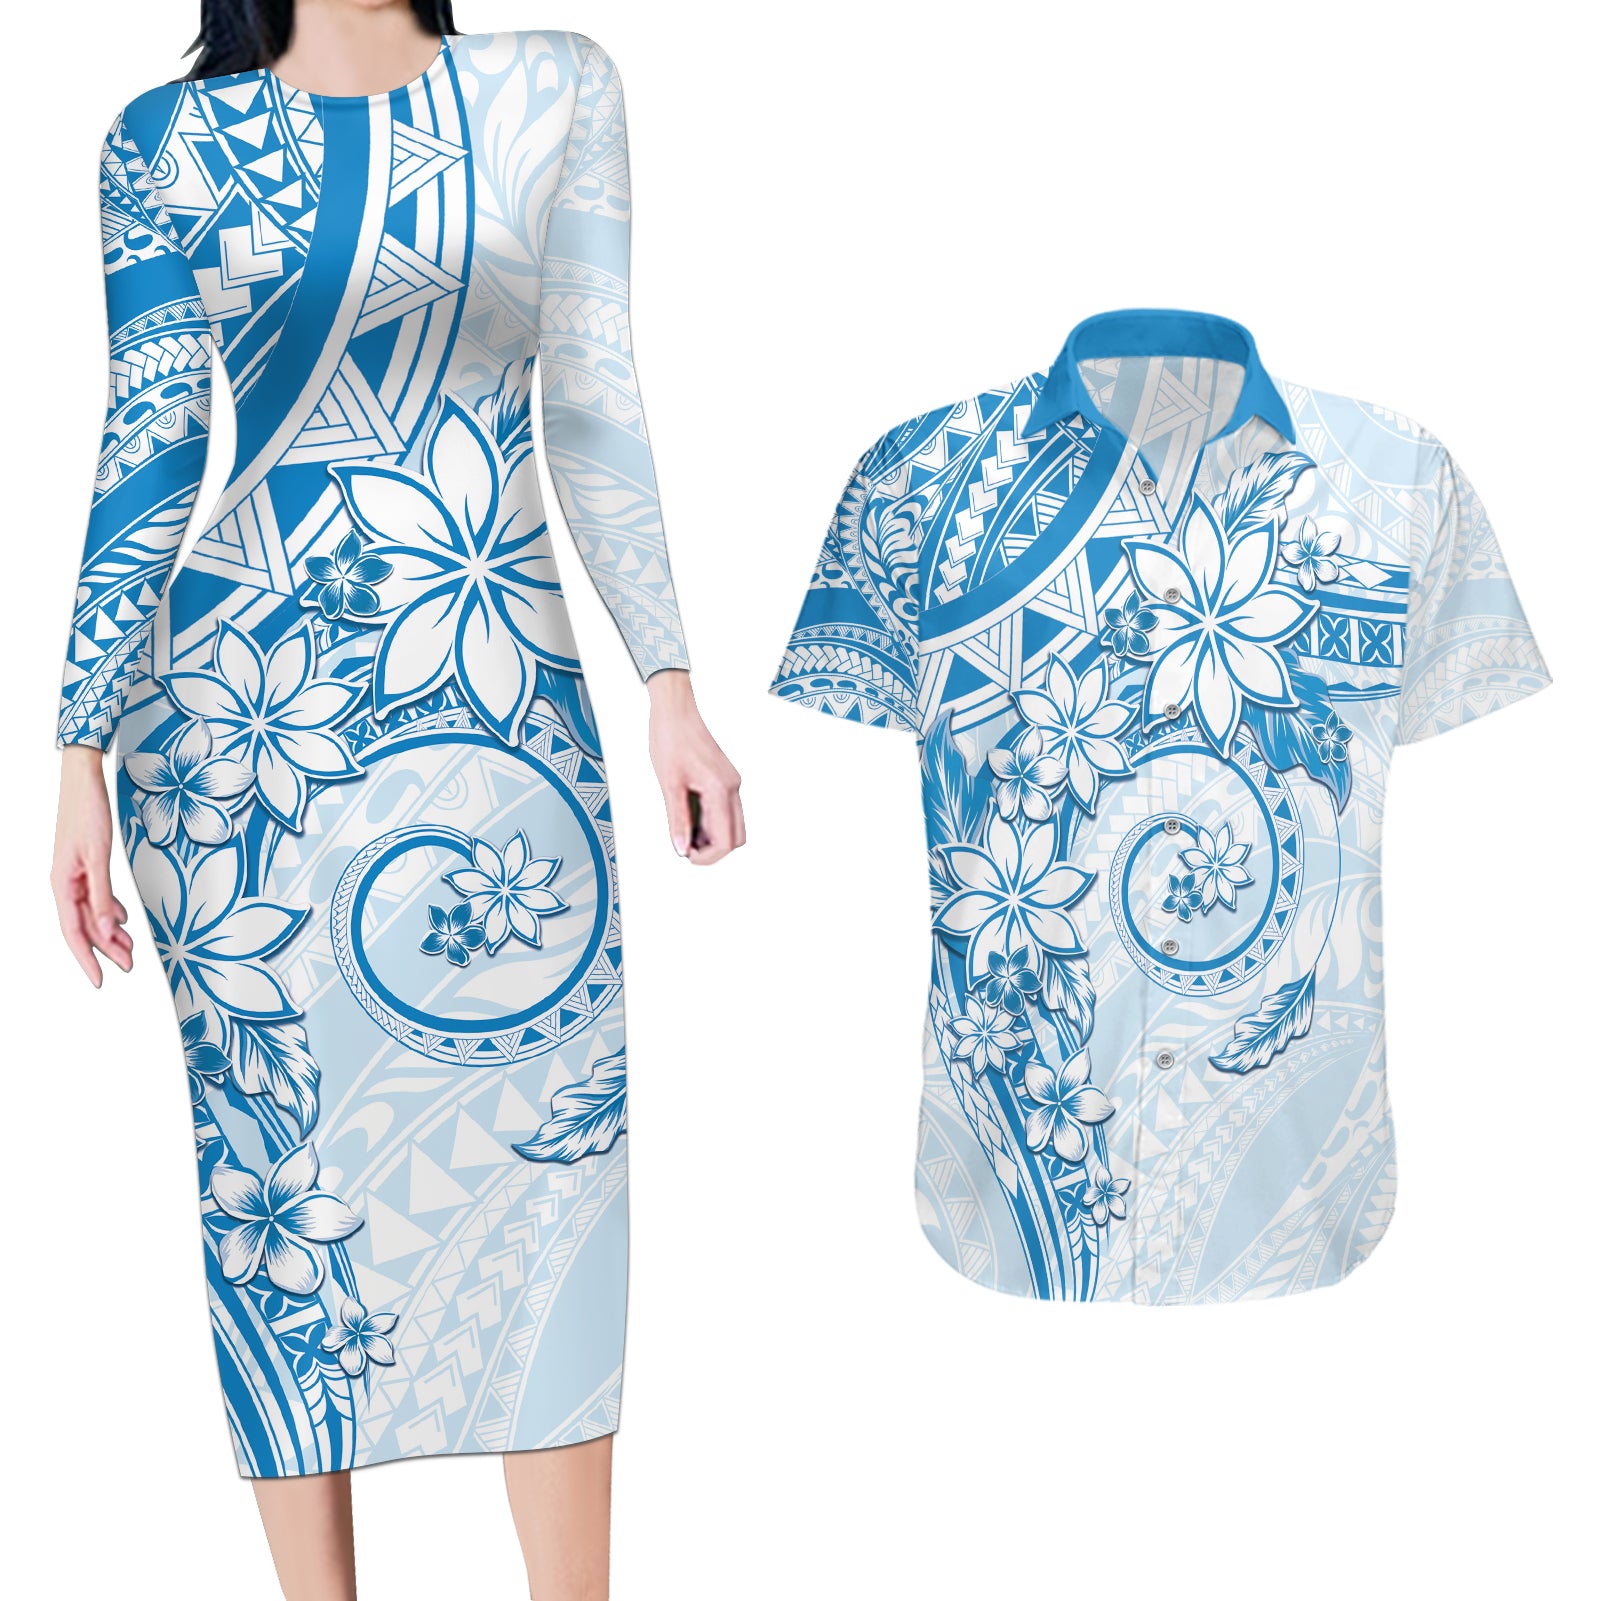 Polynesian Pattern With Plumeria Flowers Couples Matching Long Sleeve Bodycon Dress and Hawaiian Shirt Blue